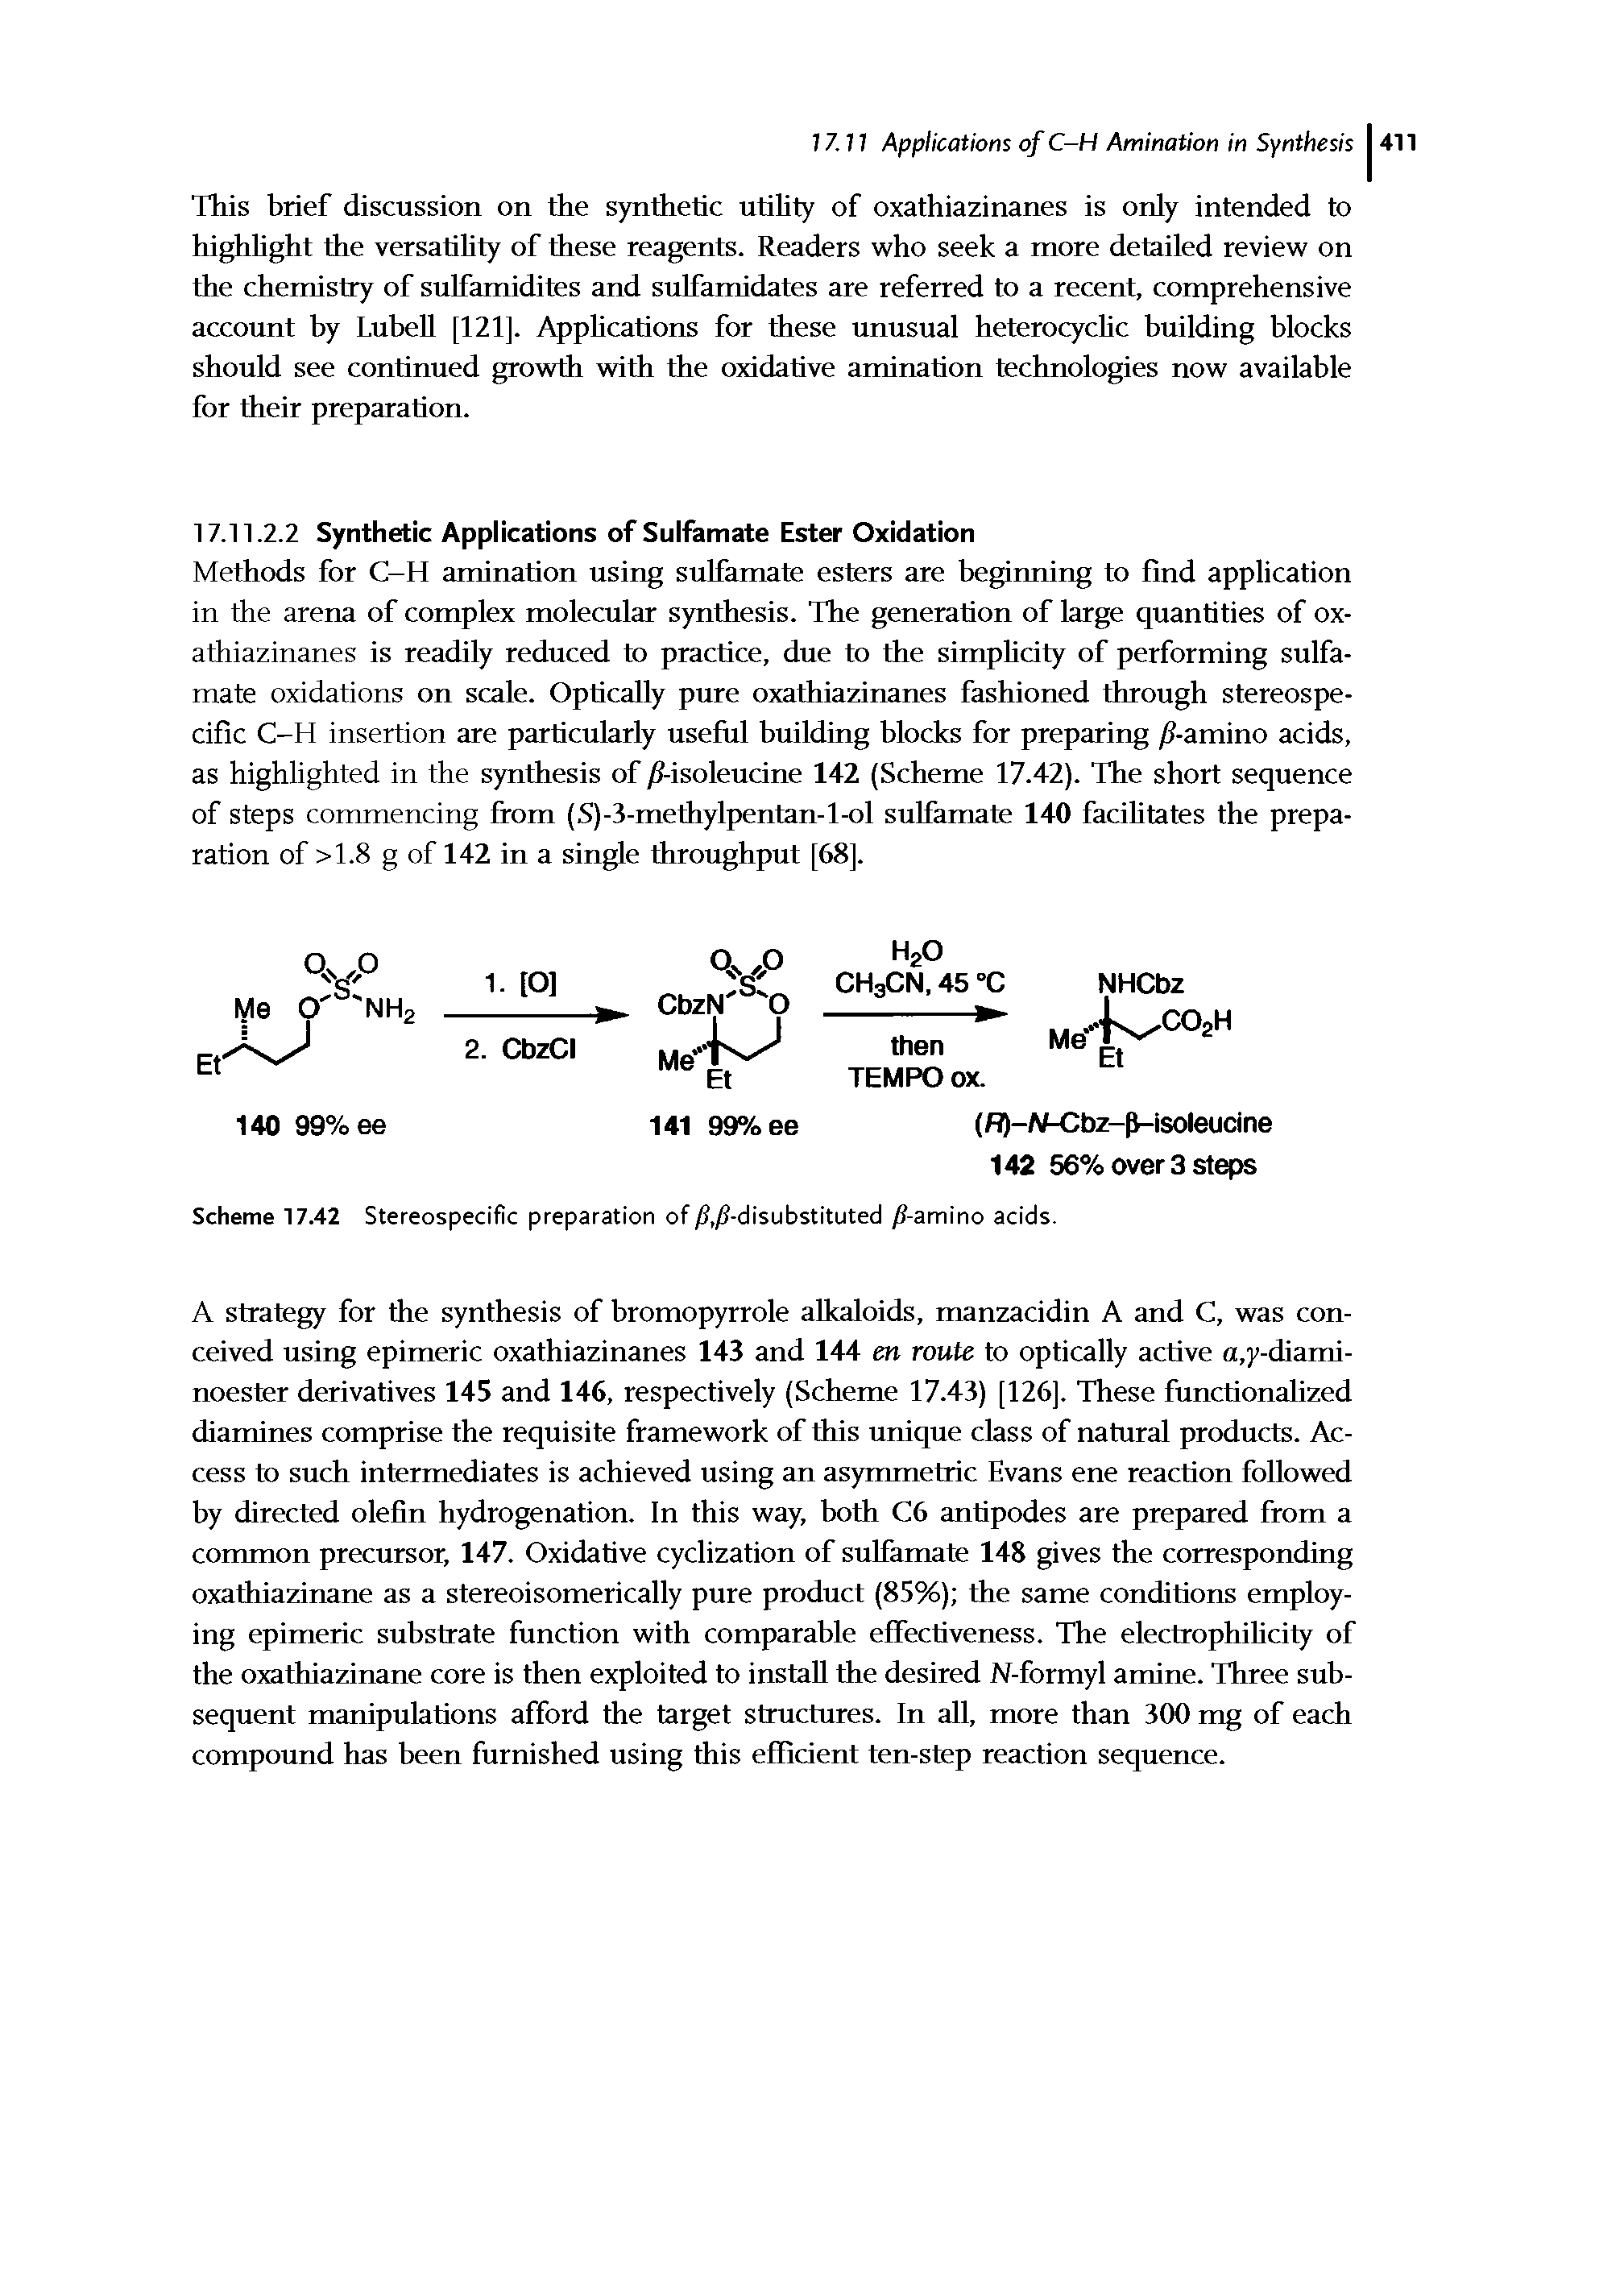 Scheme 17.42 Stereospecific preparation of/S,/S-disubstituted / -amino acids.